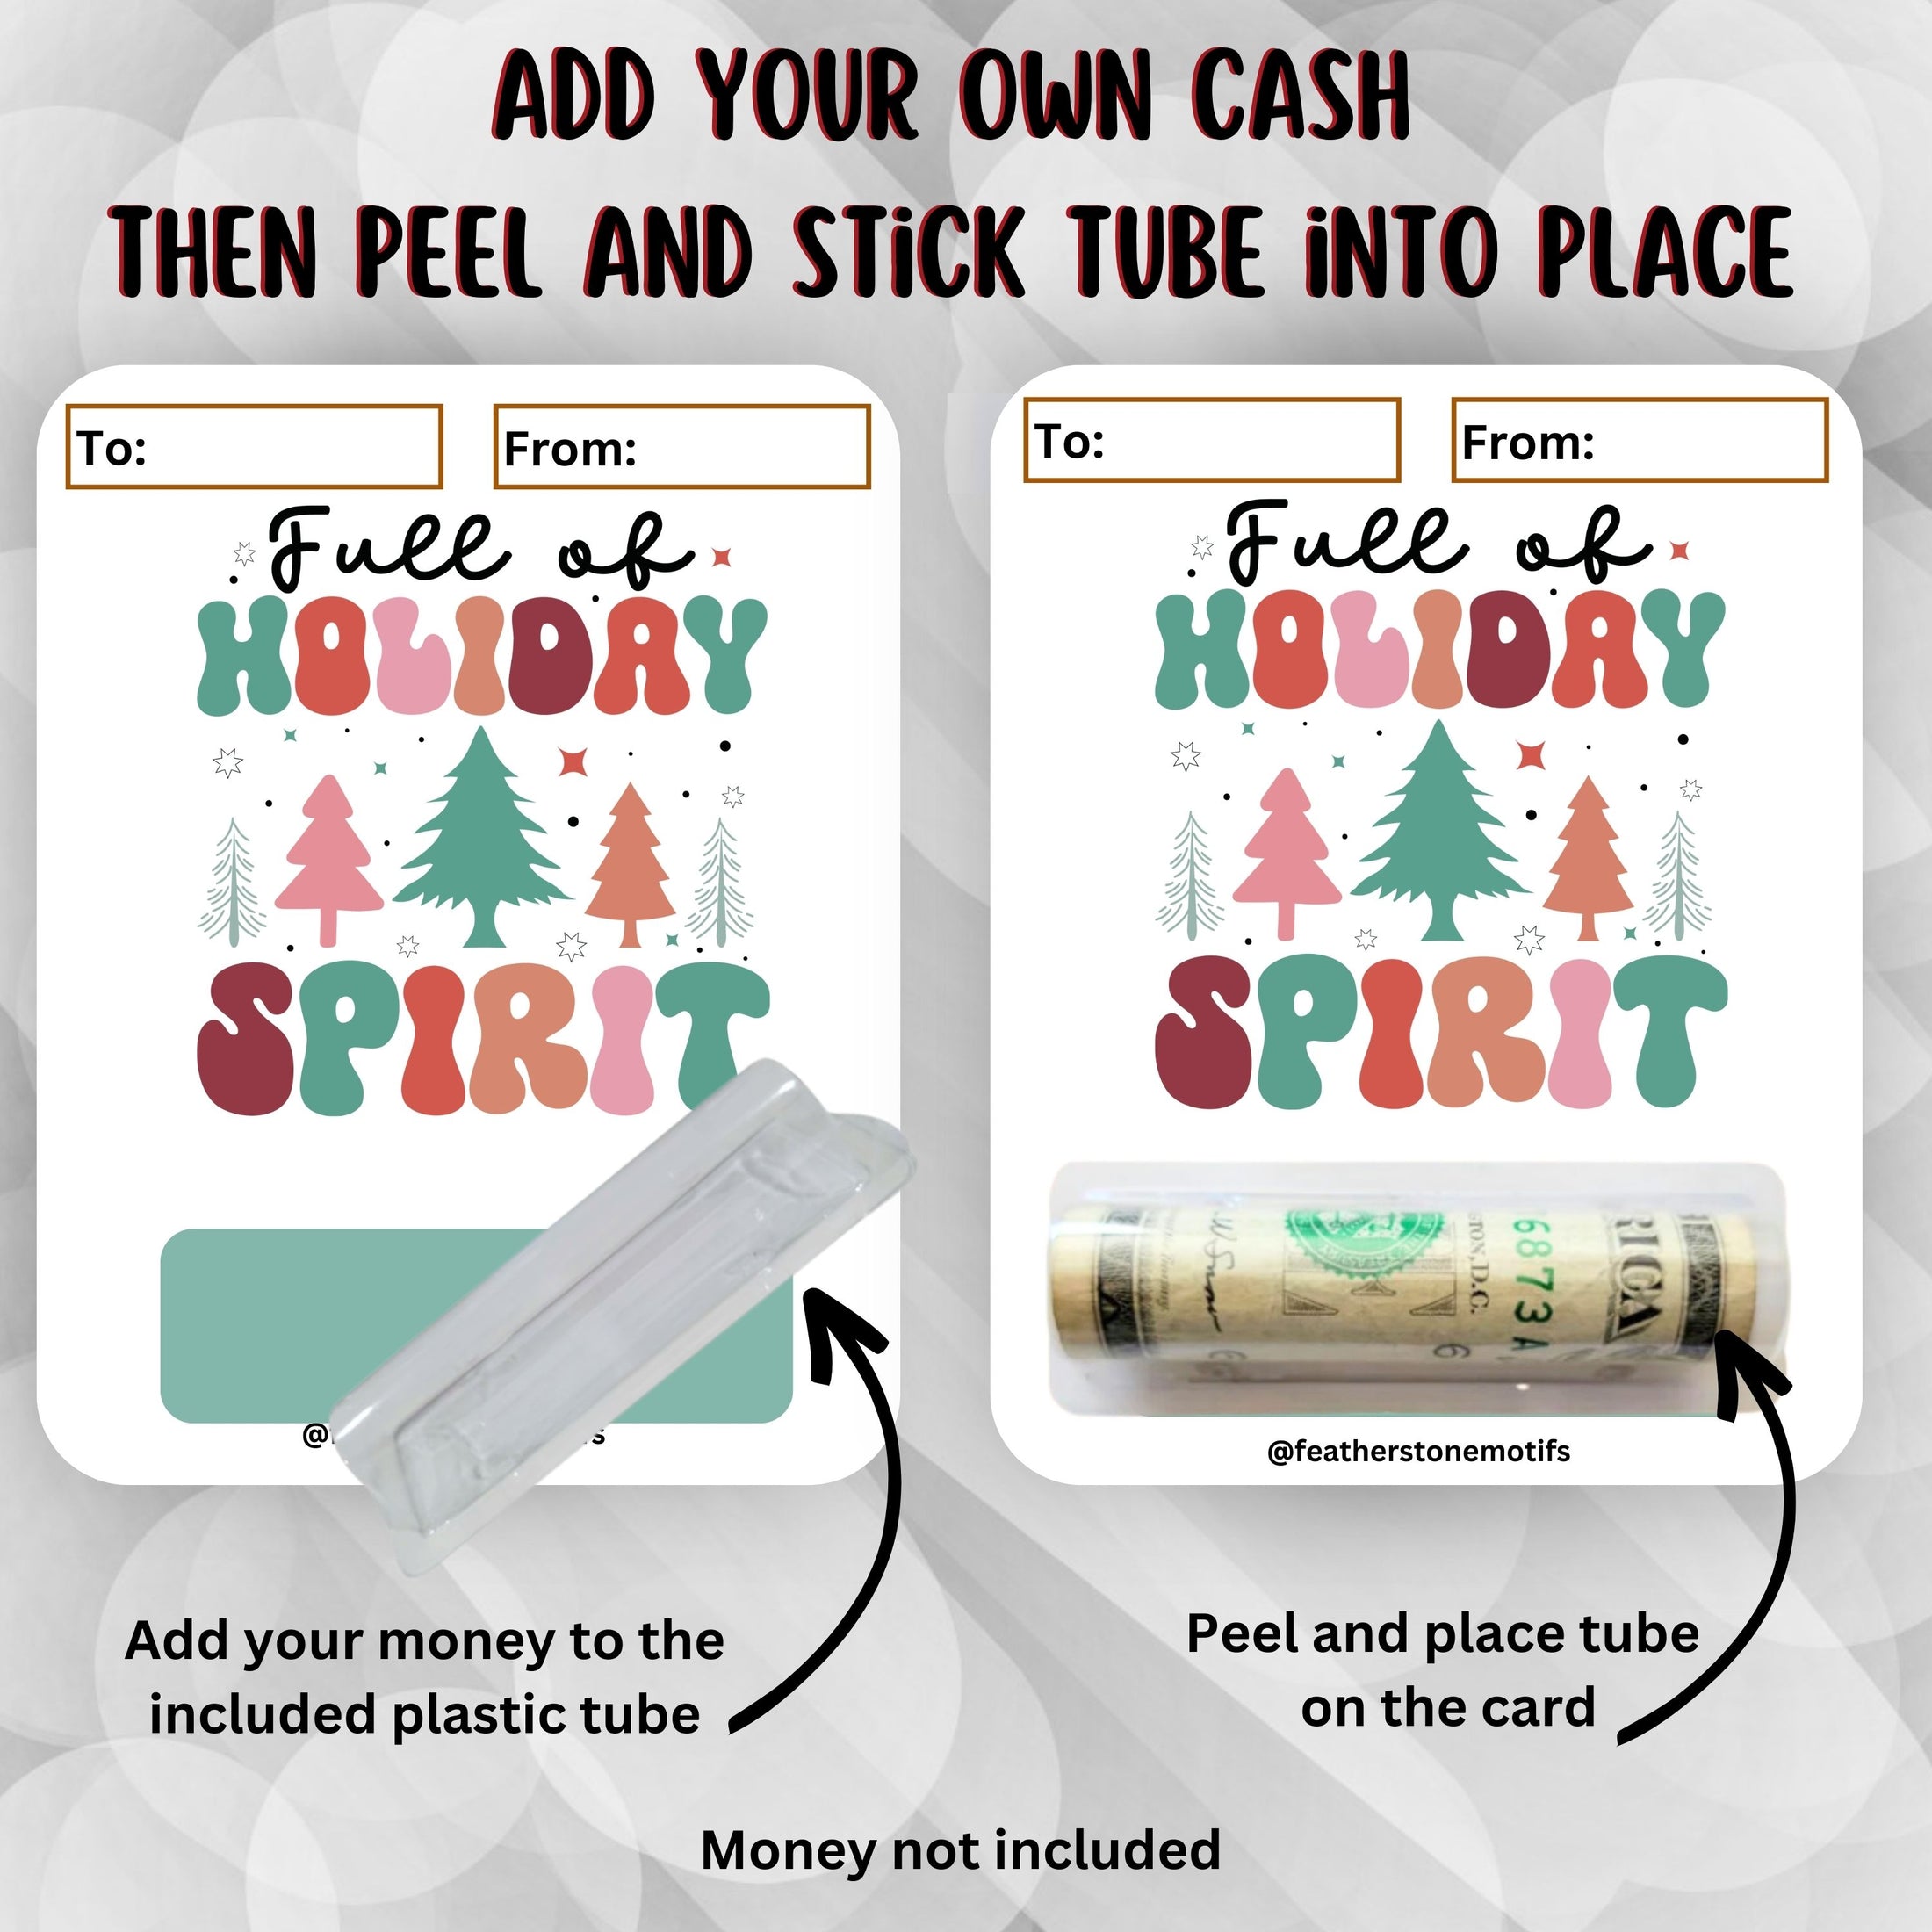 This image shows how to attach the money tube to the Holiday Spirit money card.